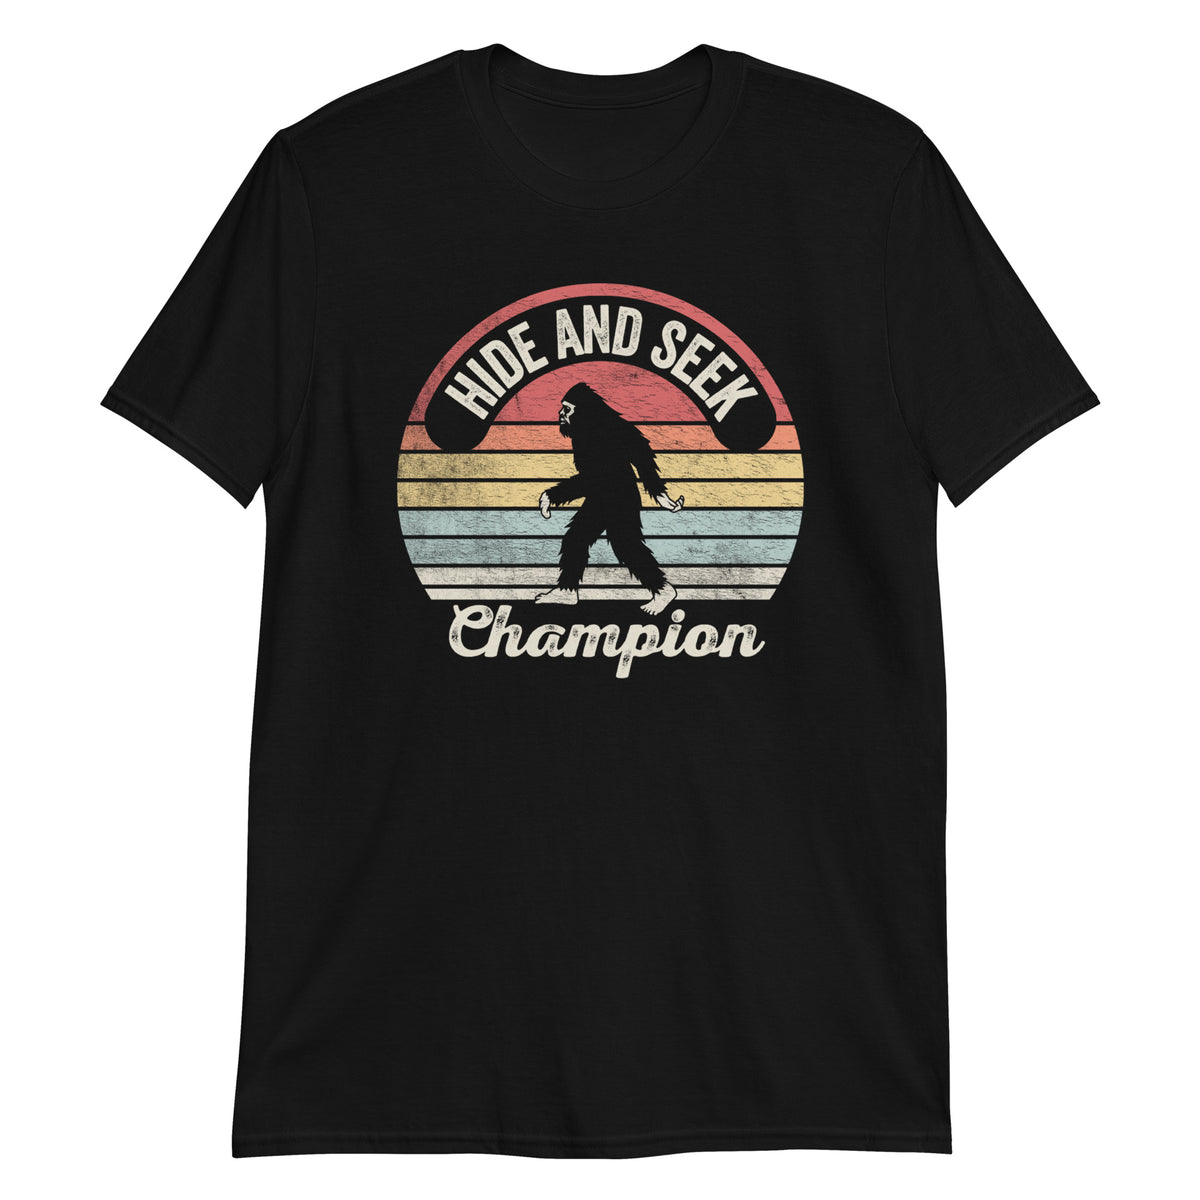 Undefeated Hide and Seek World Champion Retro Vintage T-Shirt